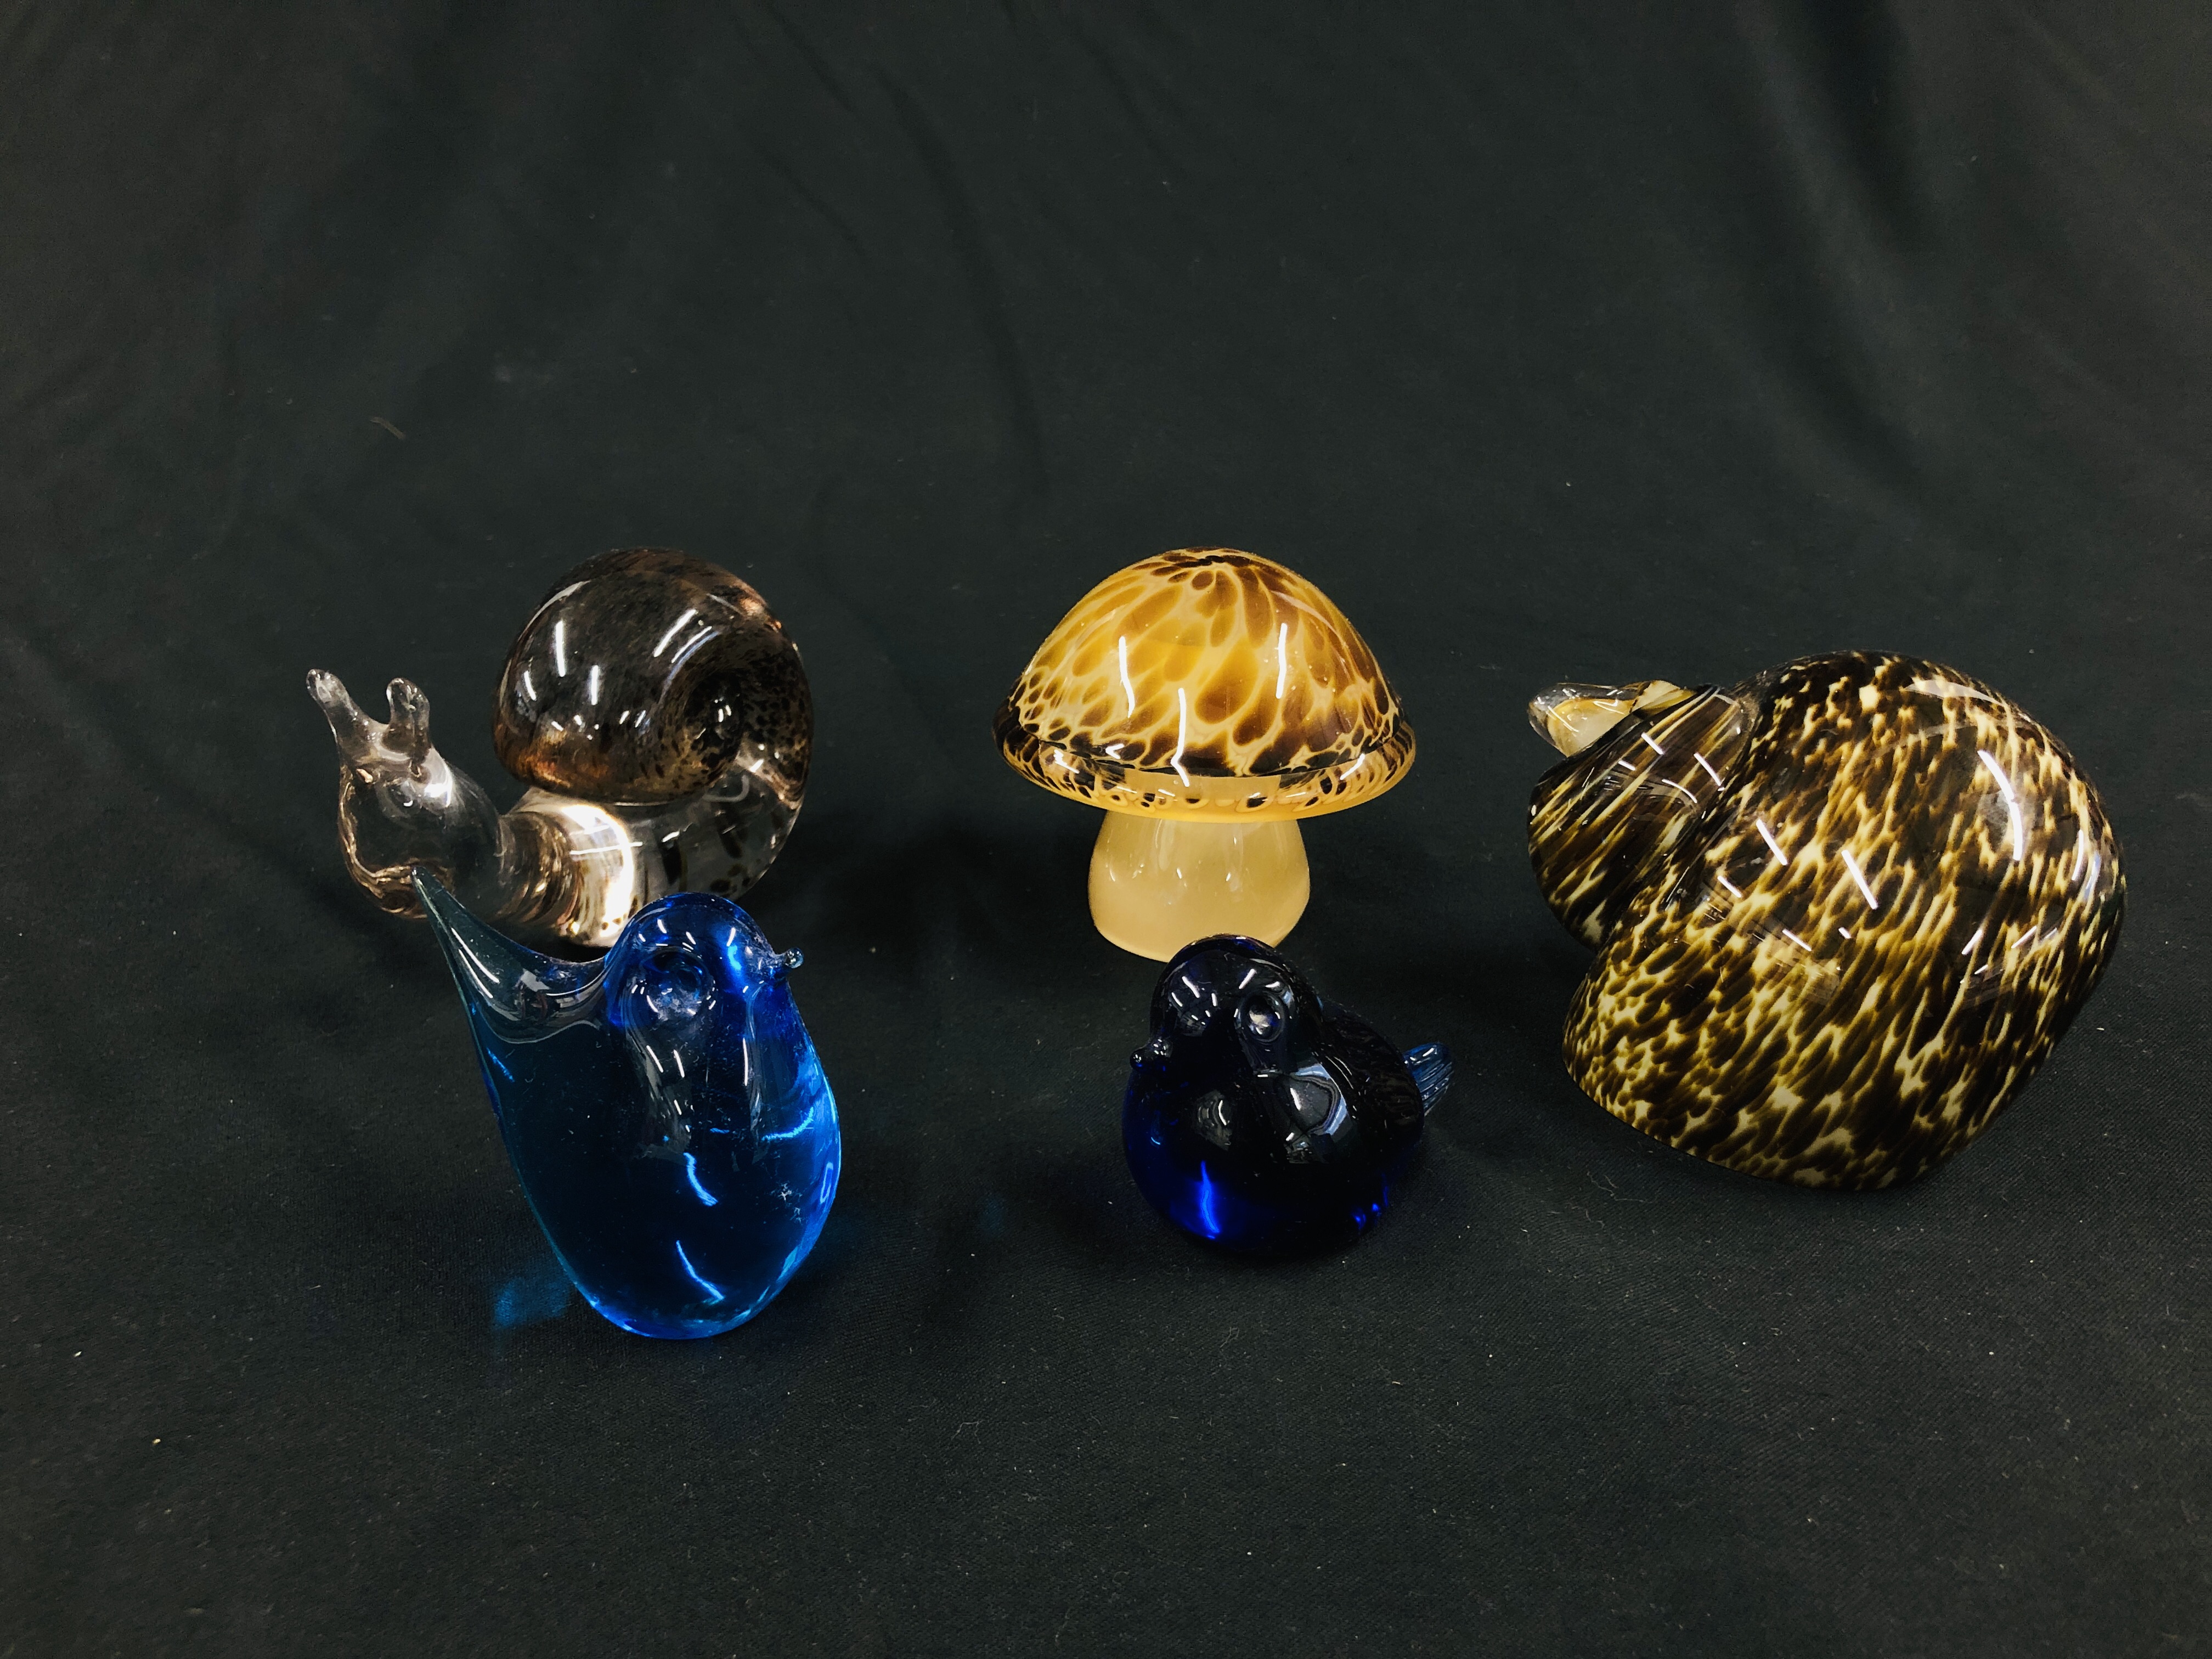 A GROUP OF 5 ART GLASS PAPERWEIGHTS TO INCLUDE 2 SNAILS AND 2 BIRDS ALONG WITH A TOADSTOOL BEARING